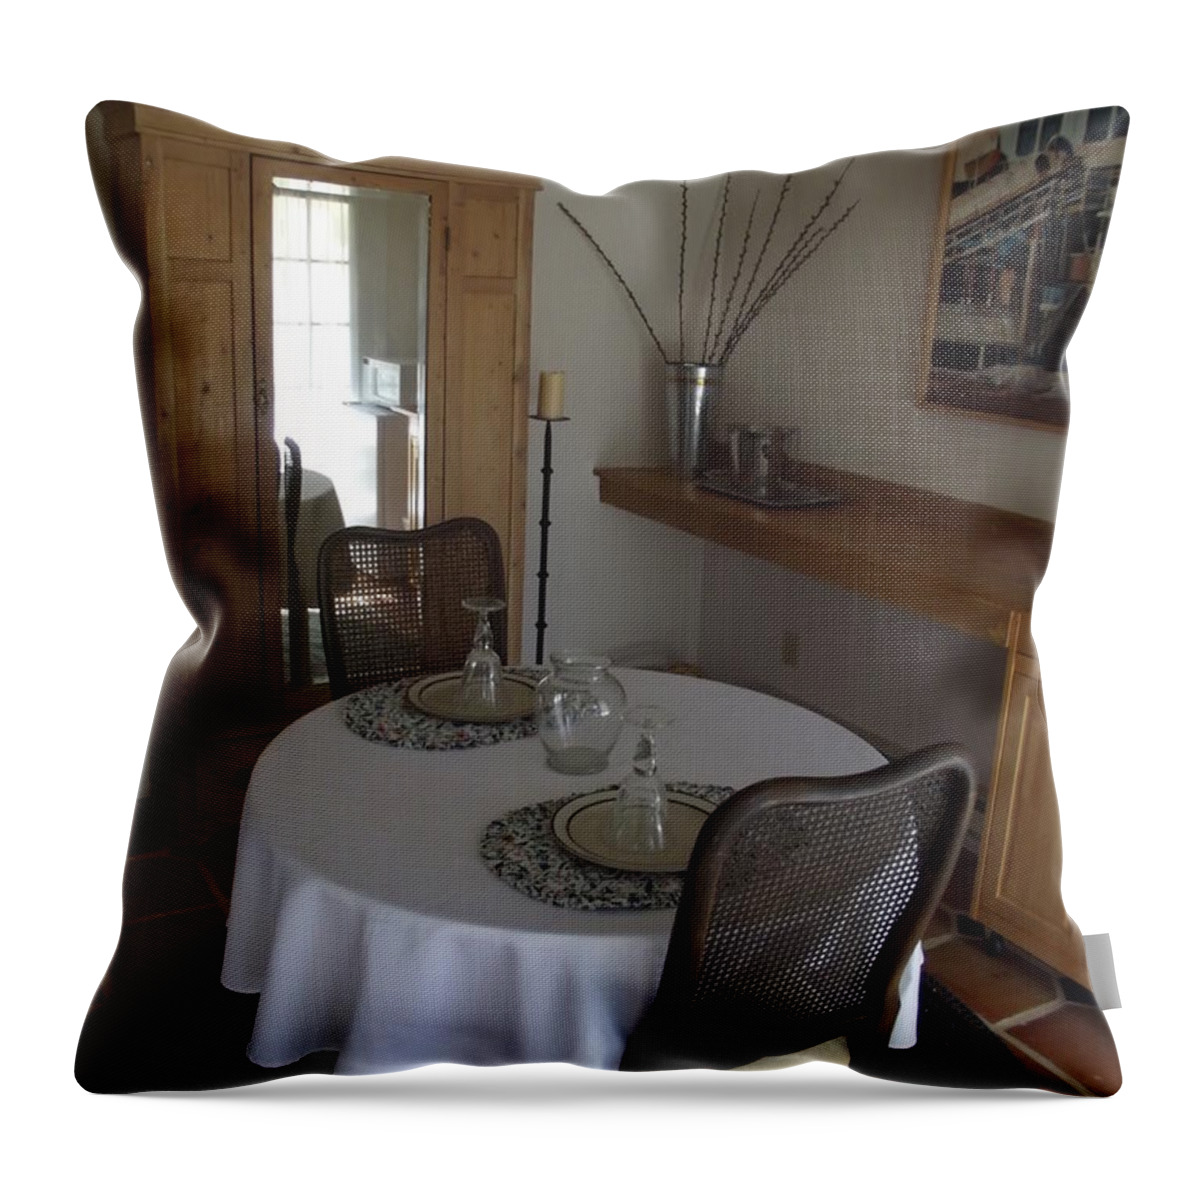 Cottage Interior Throw Pillow featuring the photograph Breakfast For Two by Andrew Drozdowicz